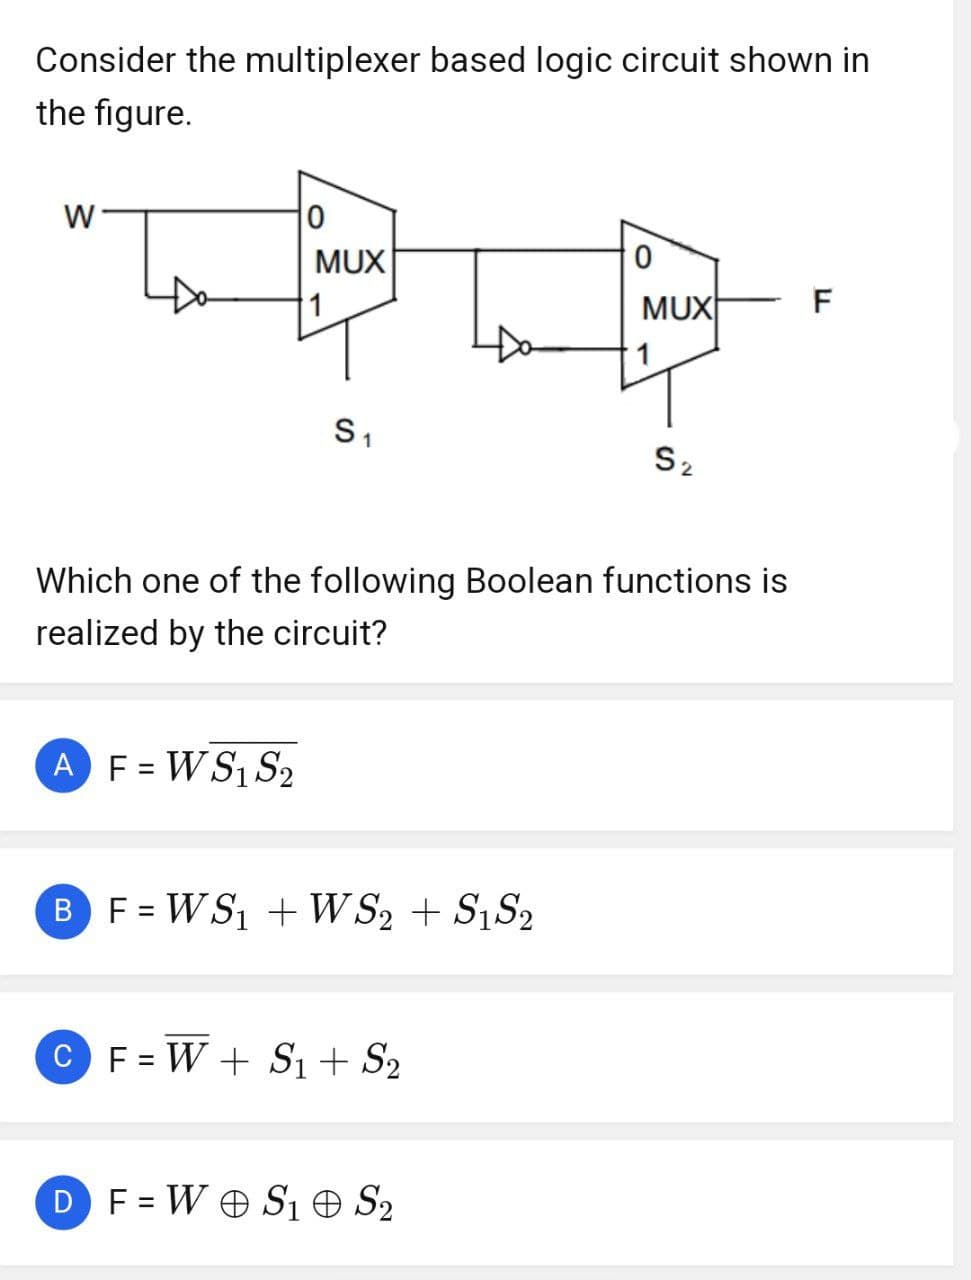 Consider the multiplexer based logic circuit shown in
the figure.
W
Do
0
MUX
AF = W S₁ S₂
S₁
B F = WS₁ + WS2 + S1S2
Which one of the following Boolean functions is
realized by the circuit?
C F=W + S₁ + S₂
0
DF=W S1 S₂
MUX
S₂
F